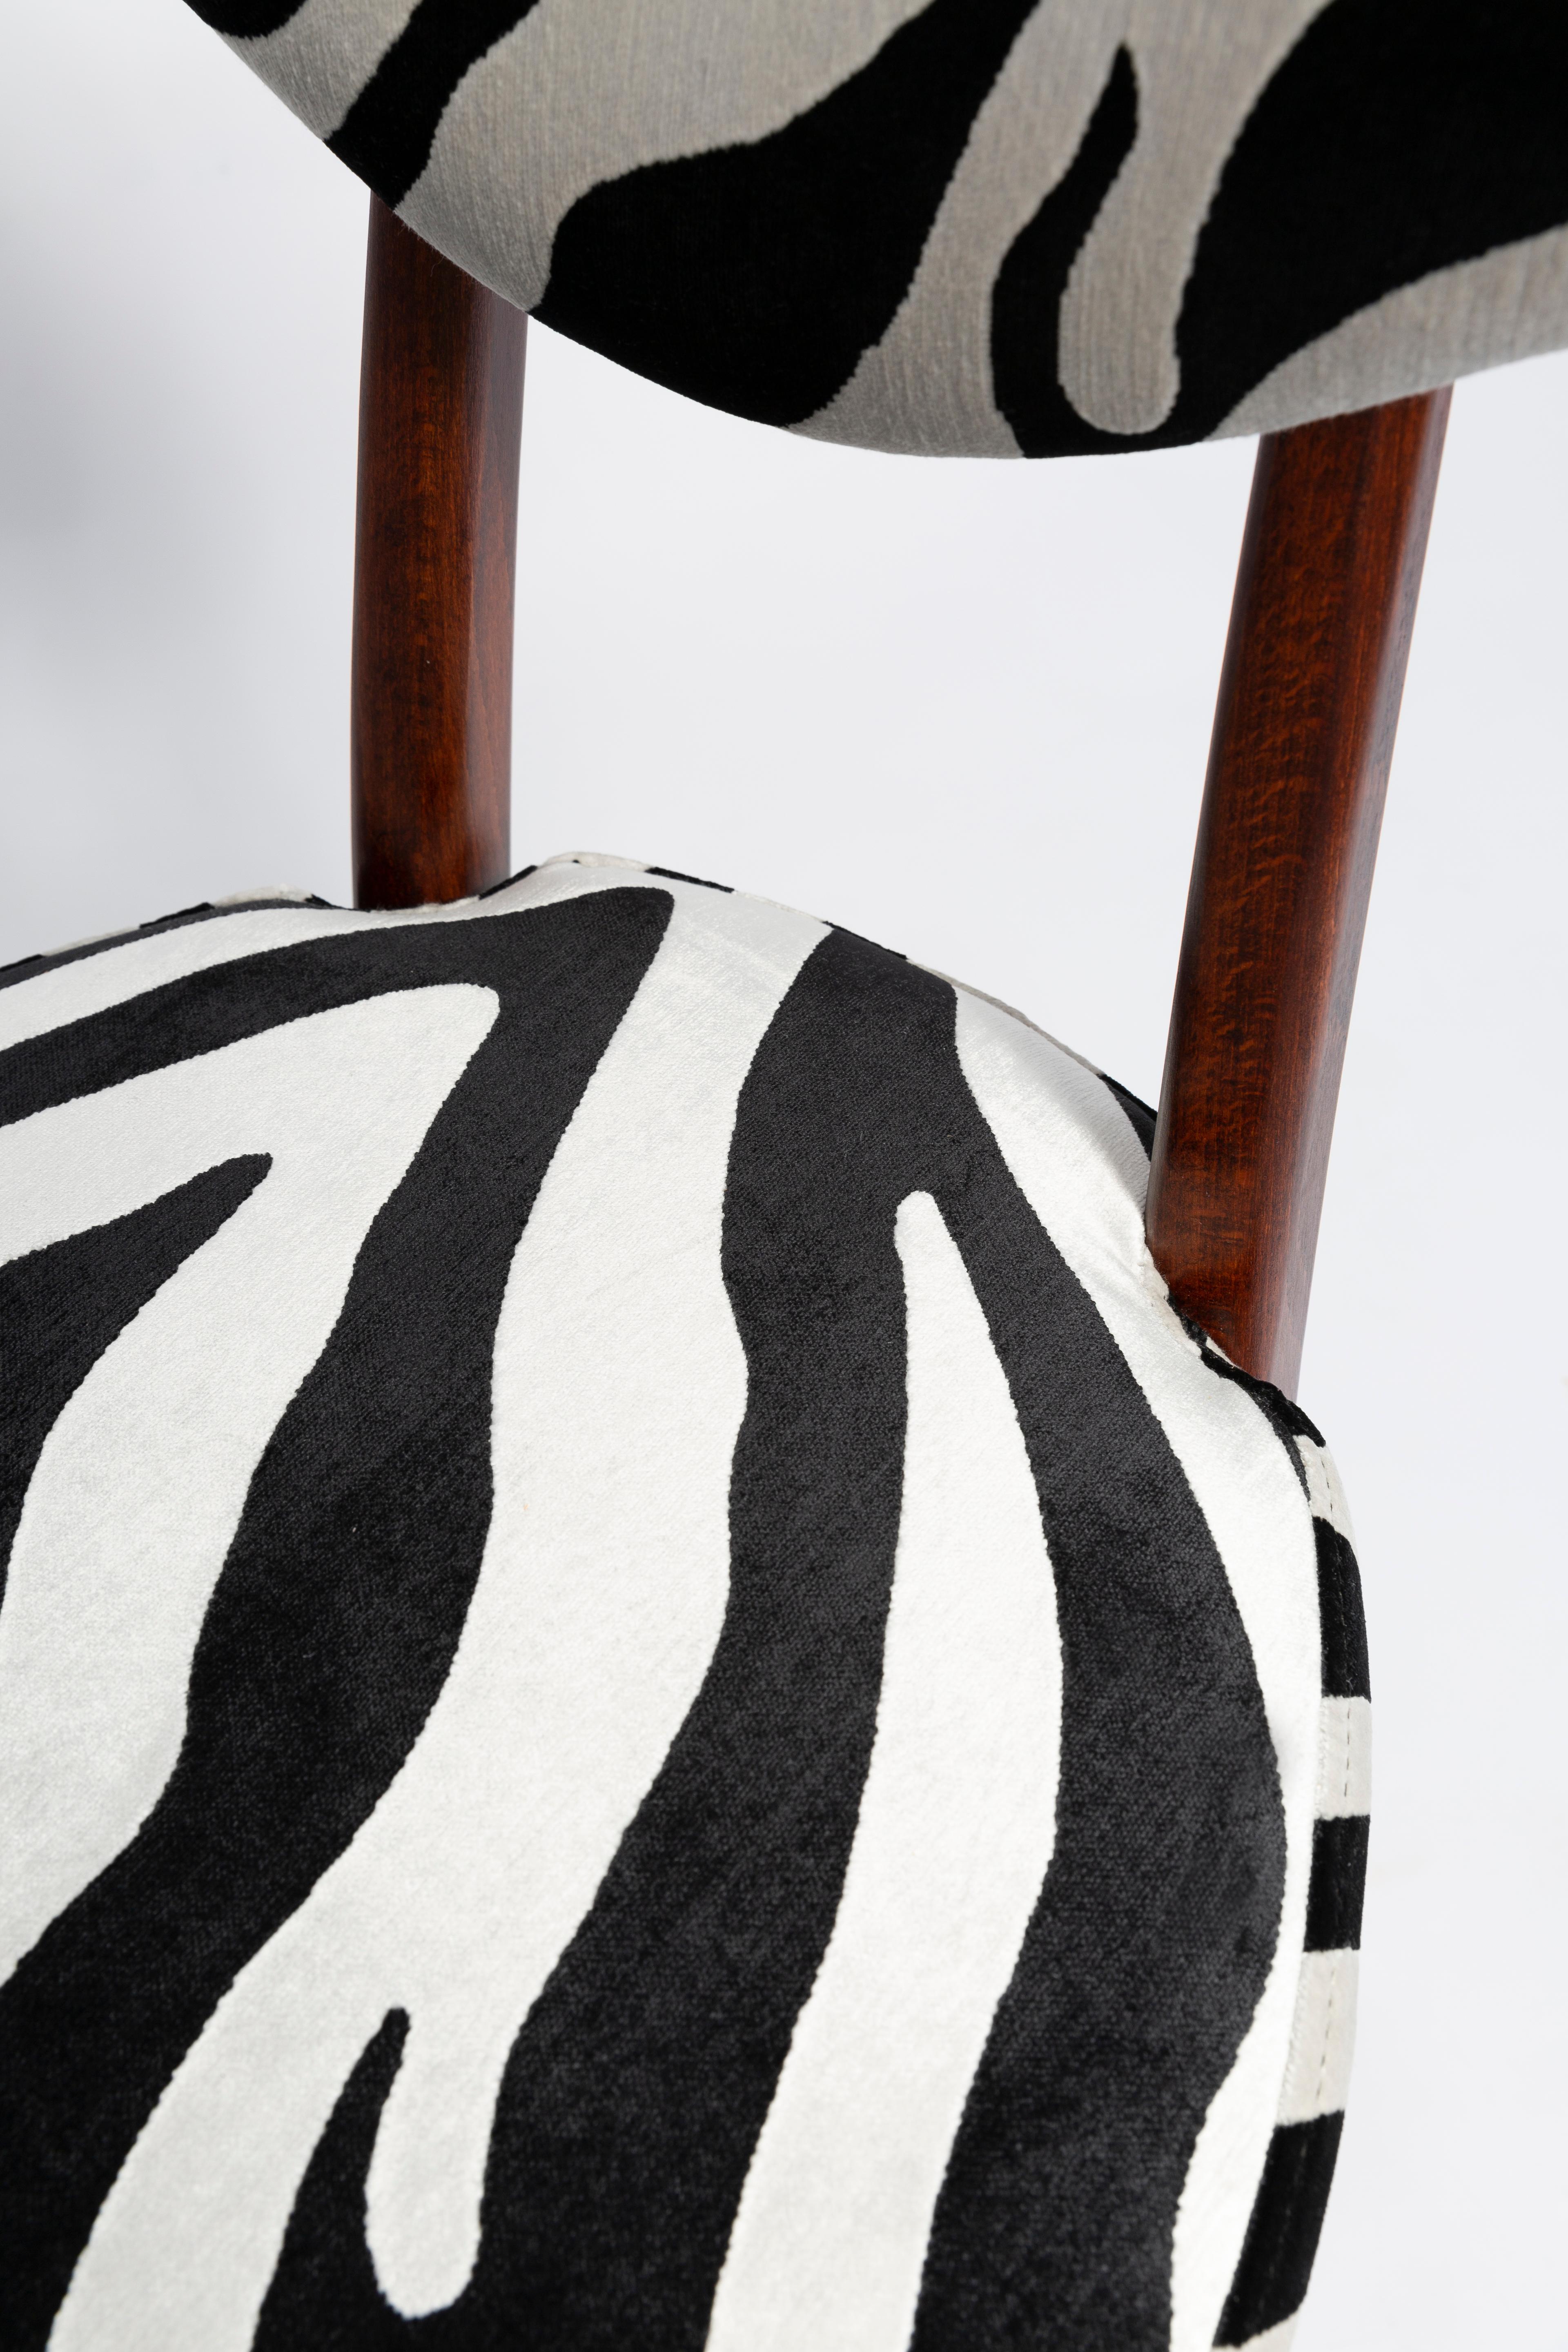 Set of Twelve Mid-Century Zebra Black and White Heart Chairs, Poland, 1960s For Sale 2